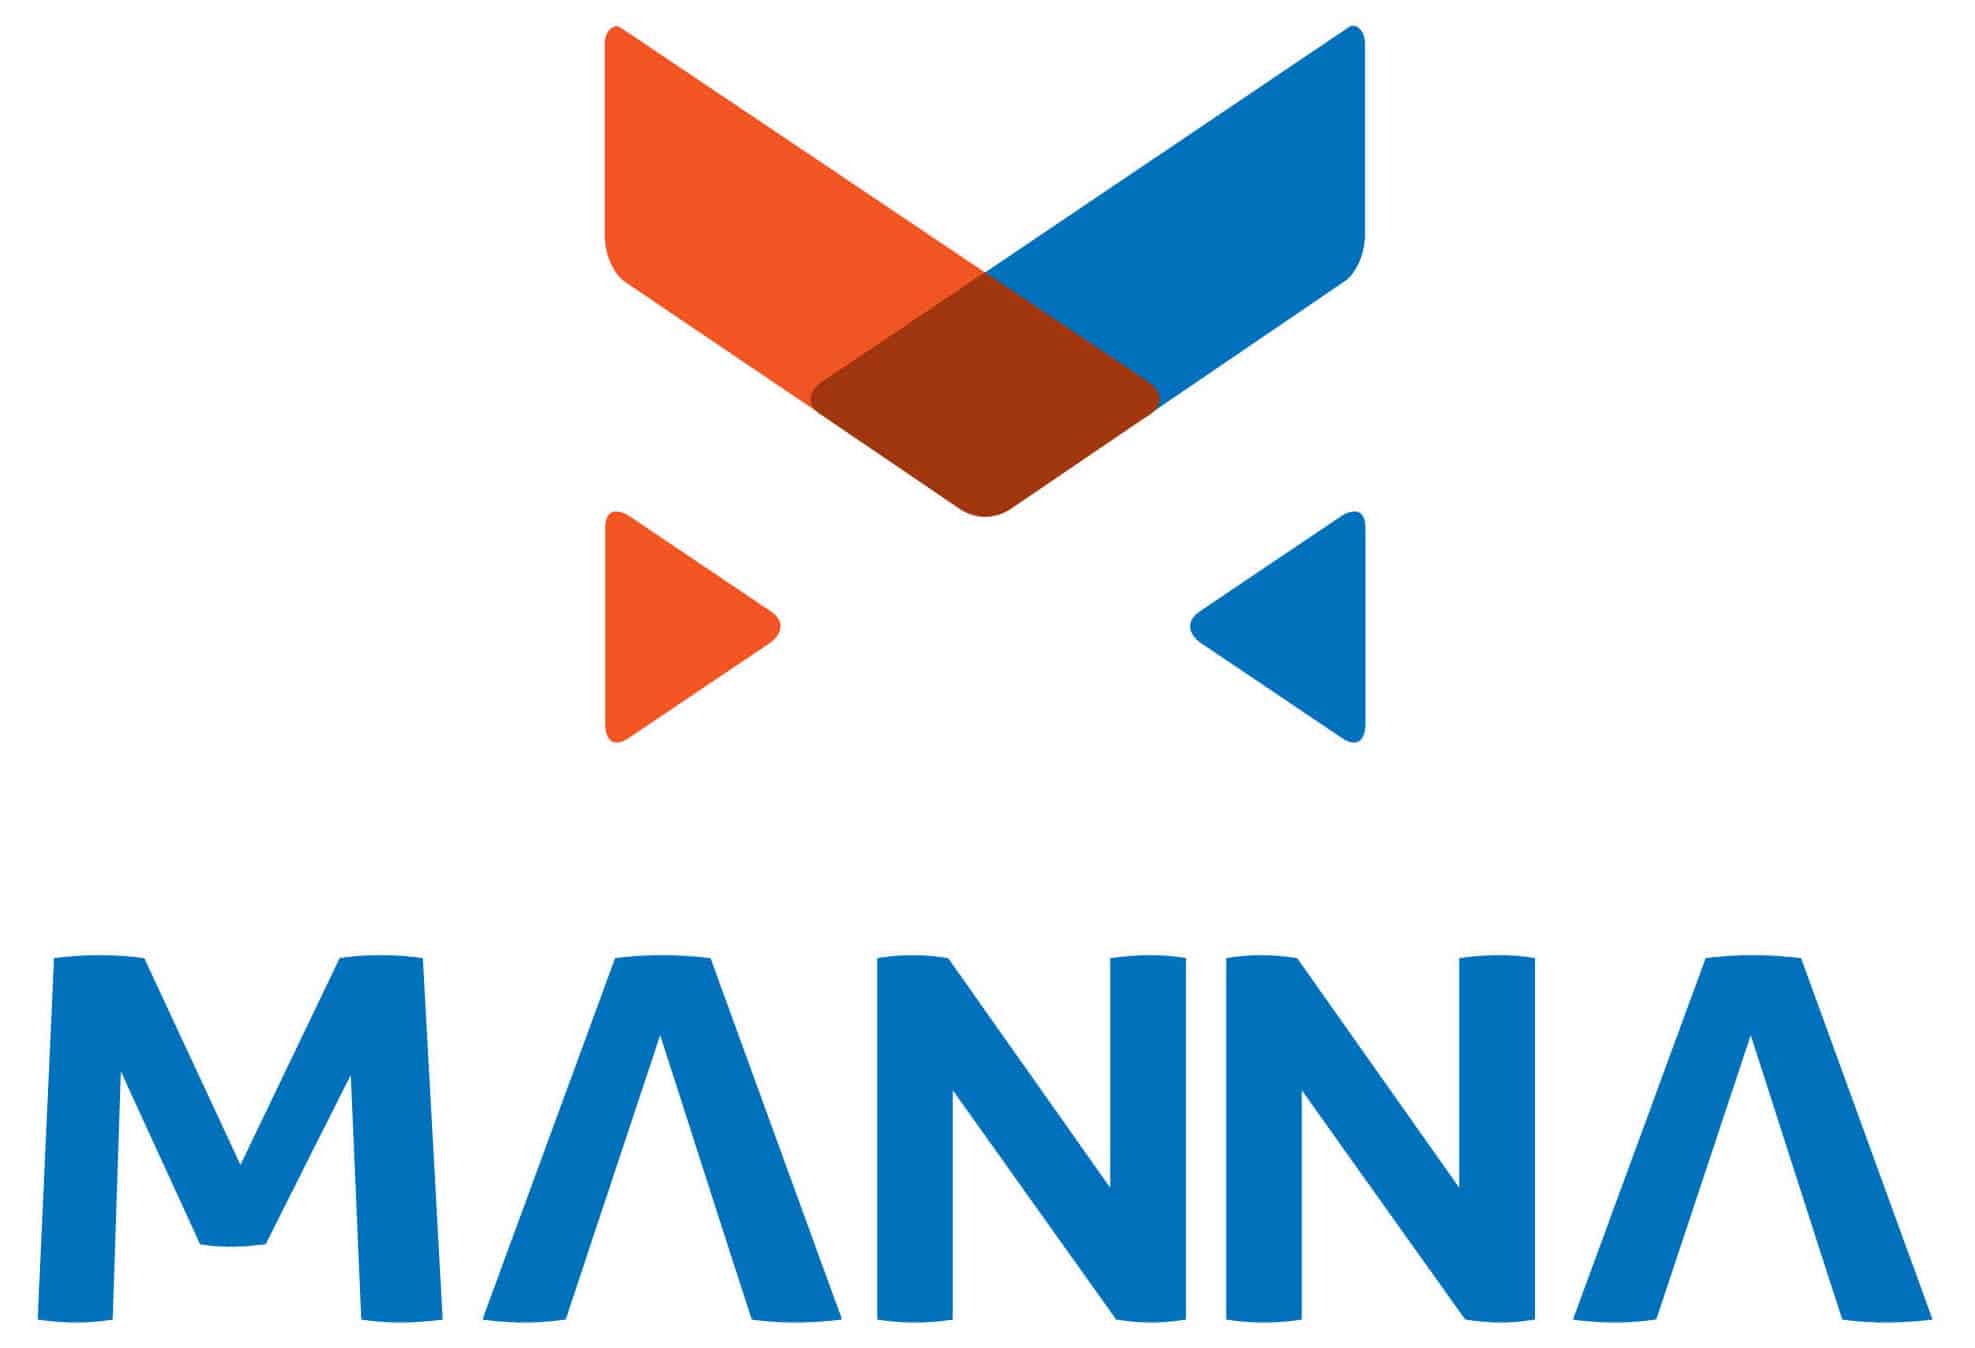 manna 13 mobility startups that will boom in 2021, according to VCs